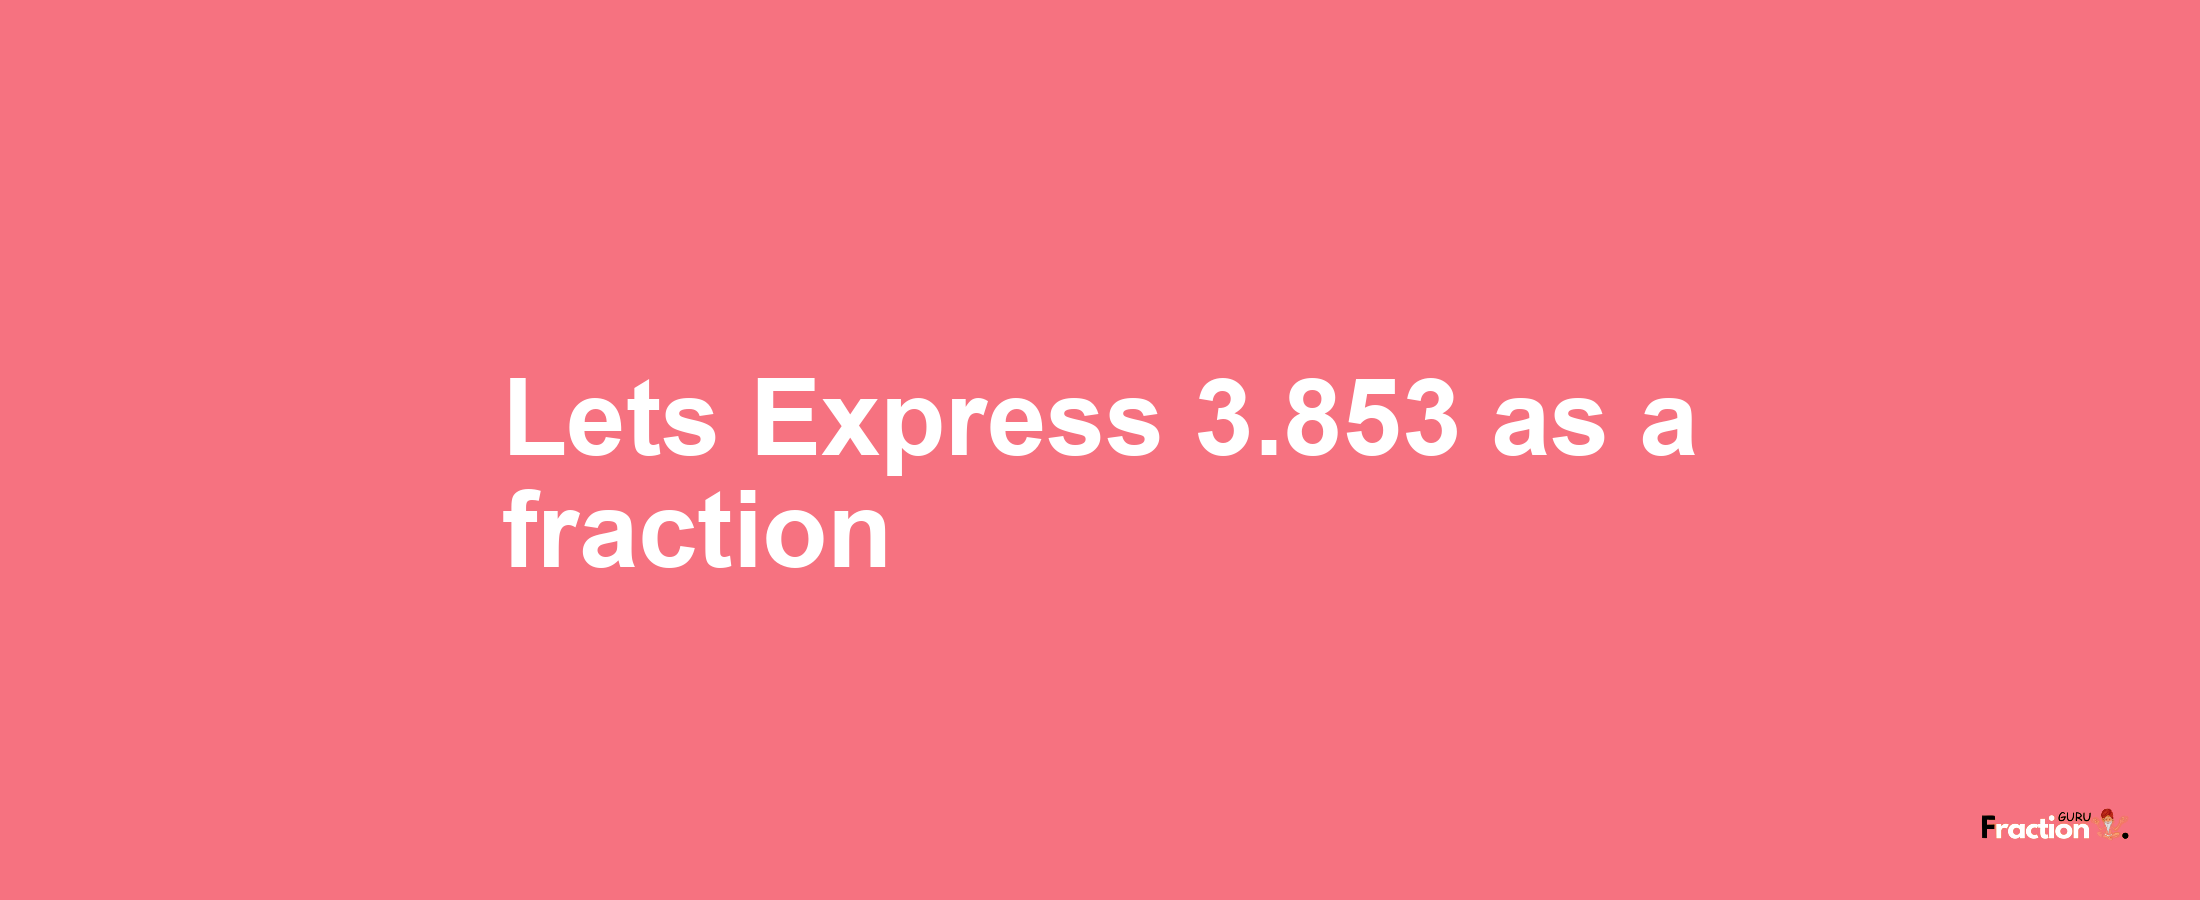 Lets Express 3.853 as afraction